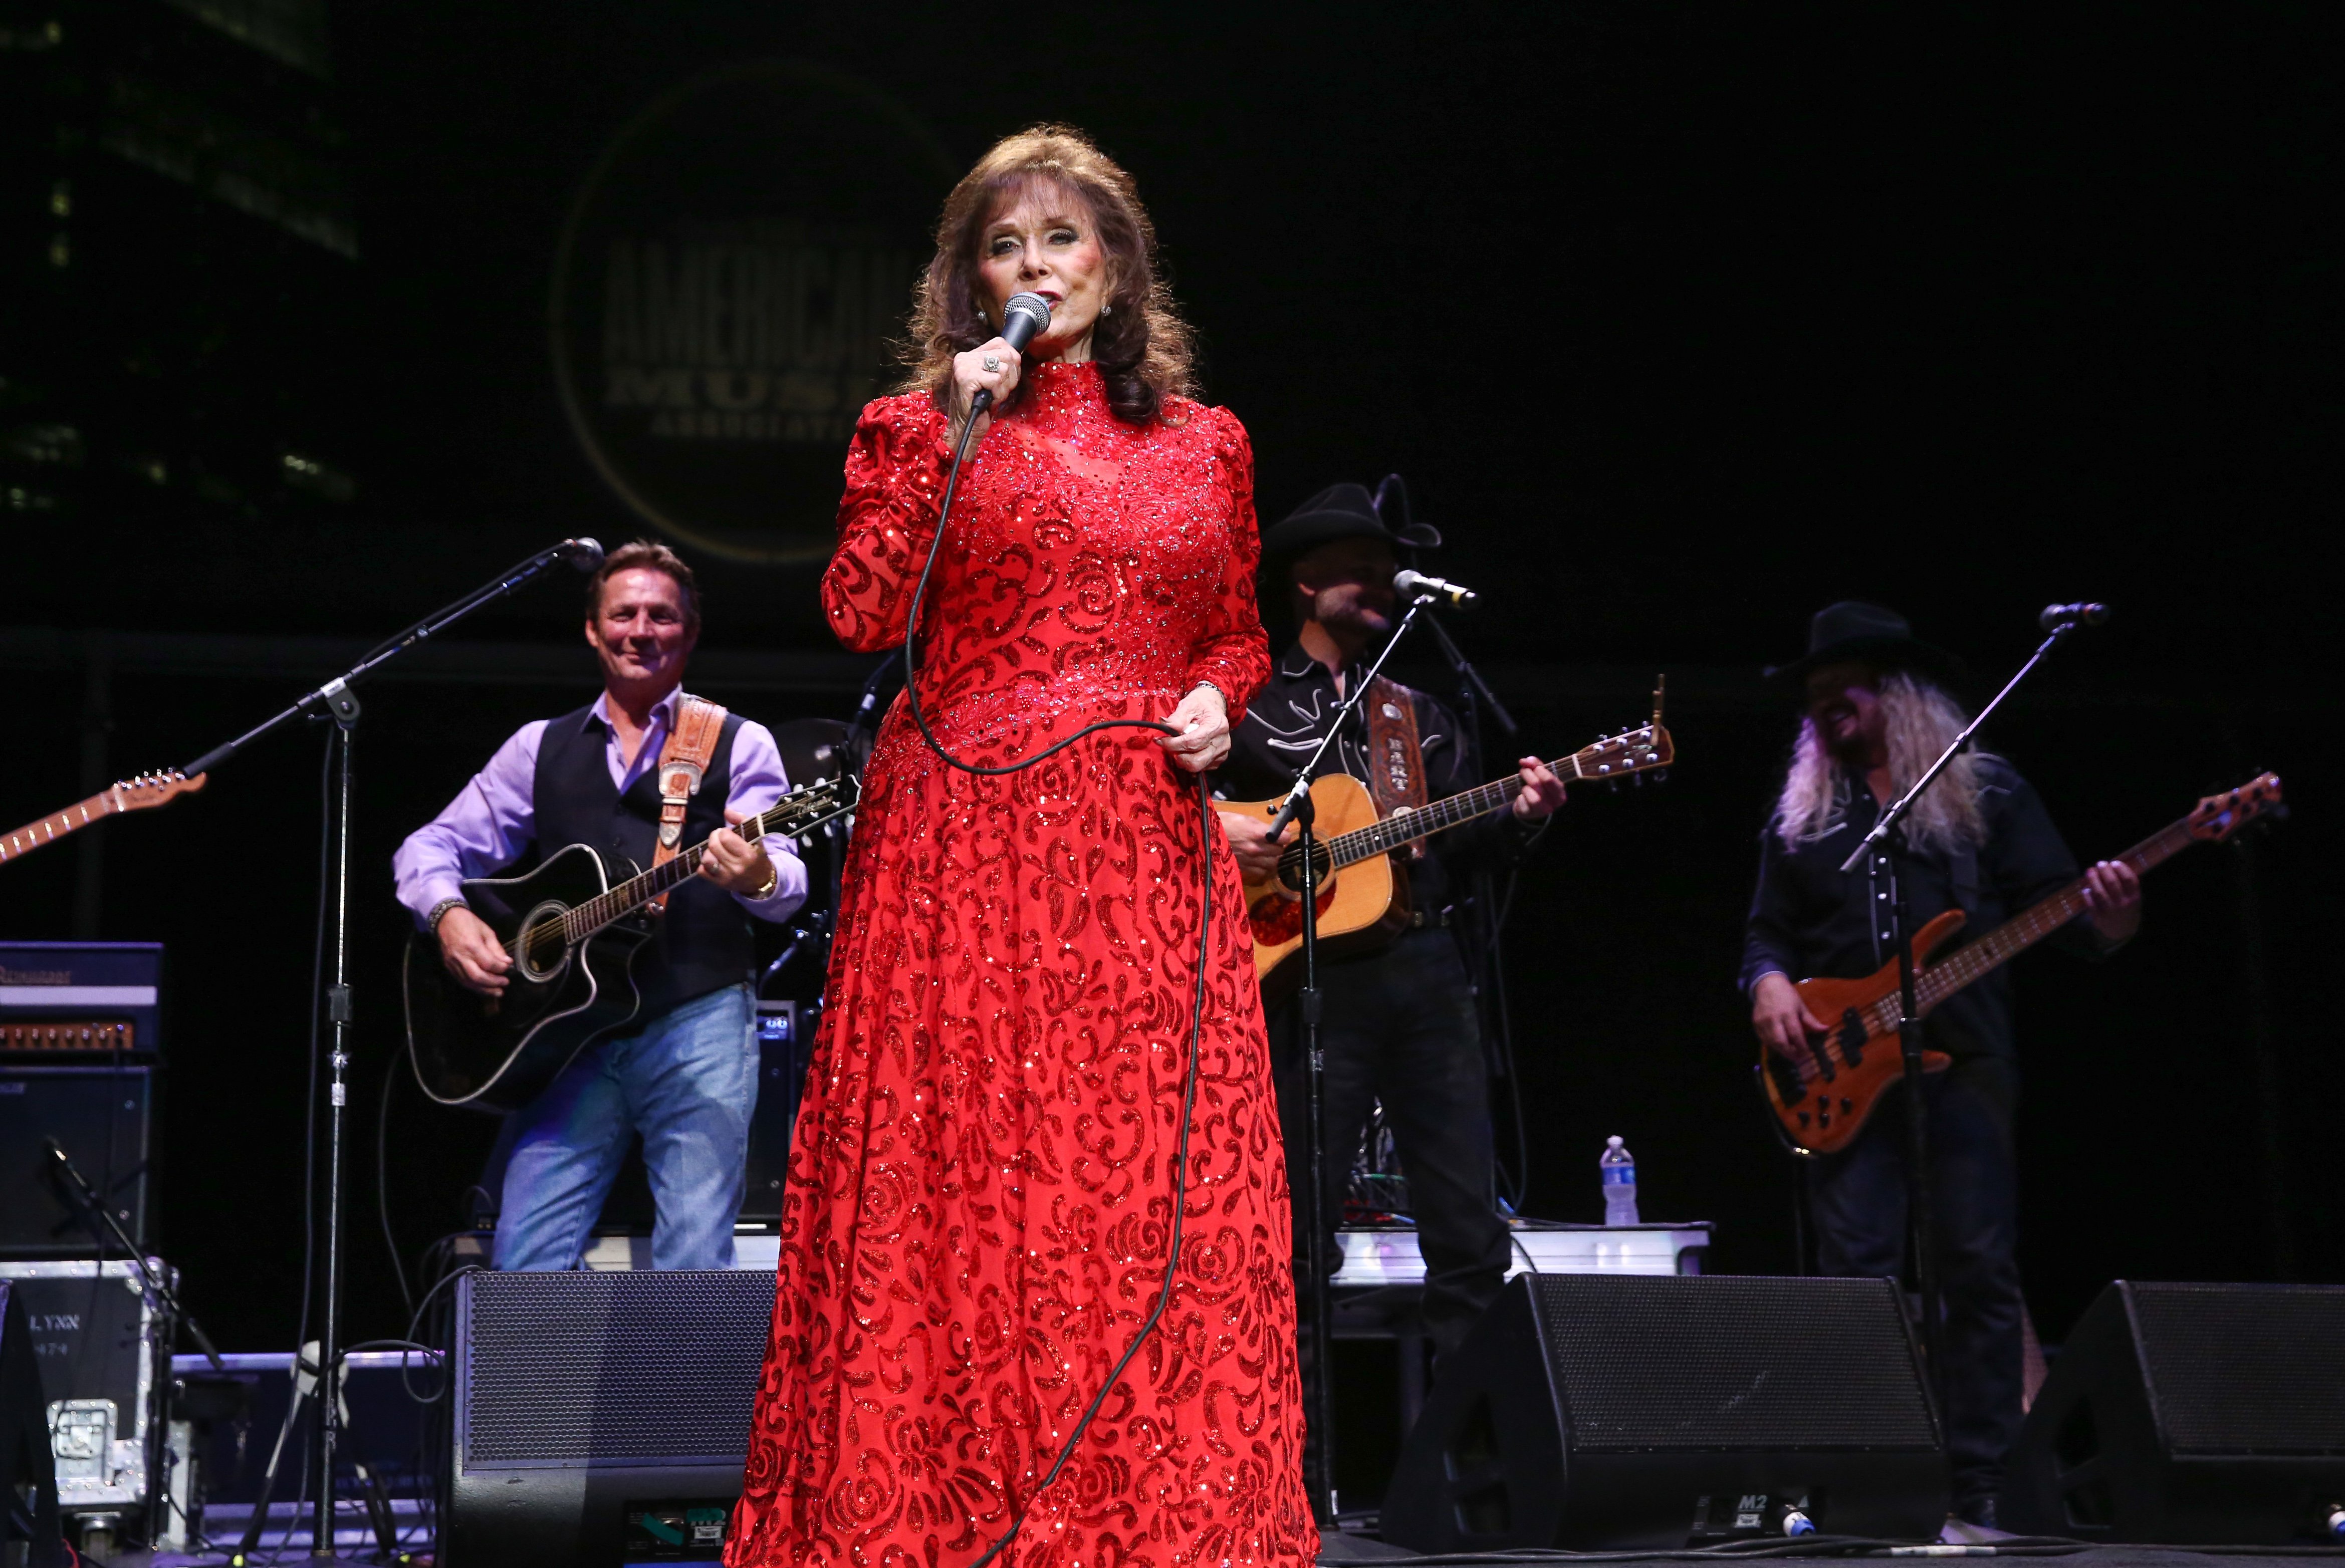 Loretta Lynn performs during the 16th Annual Americana Music Festival & Conference at Ascend Amphitheater on September 19, 2015 in Nashville